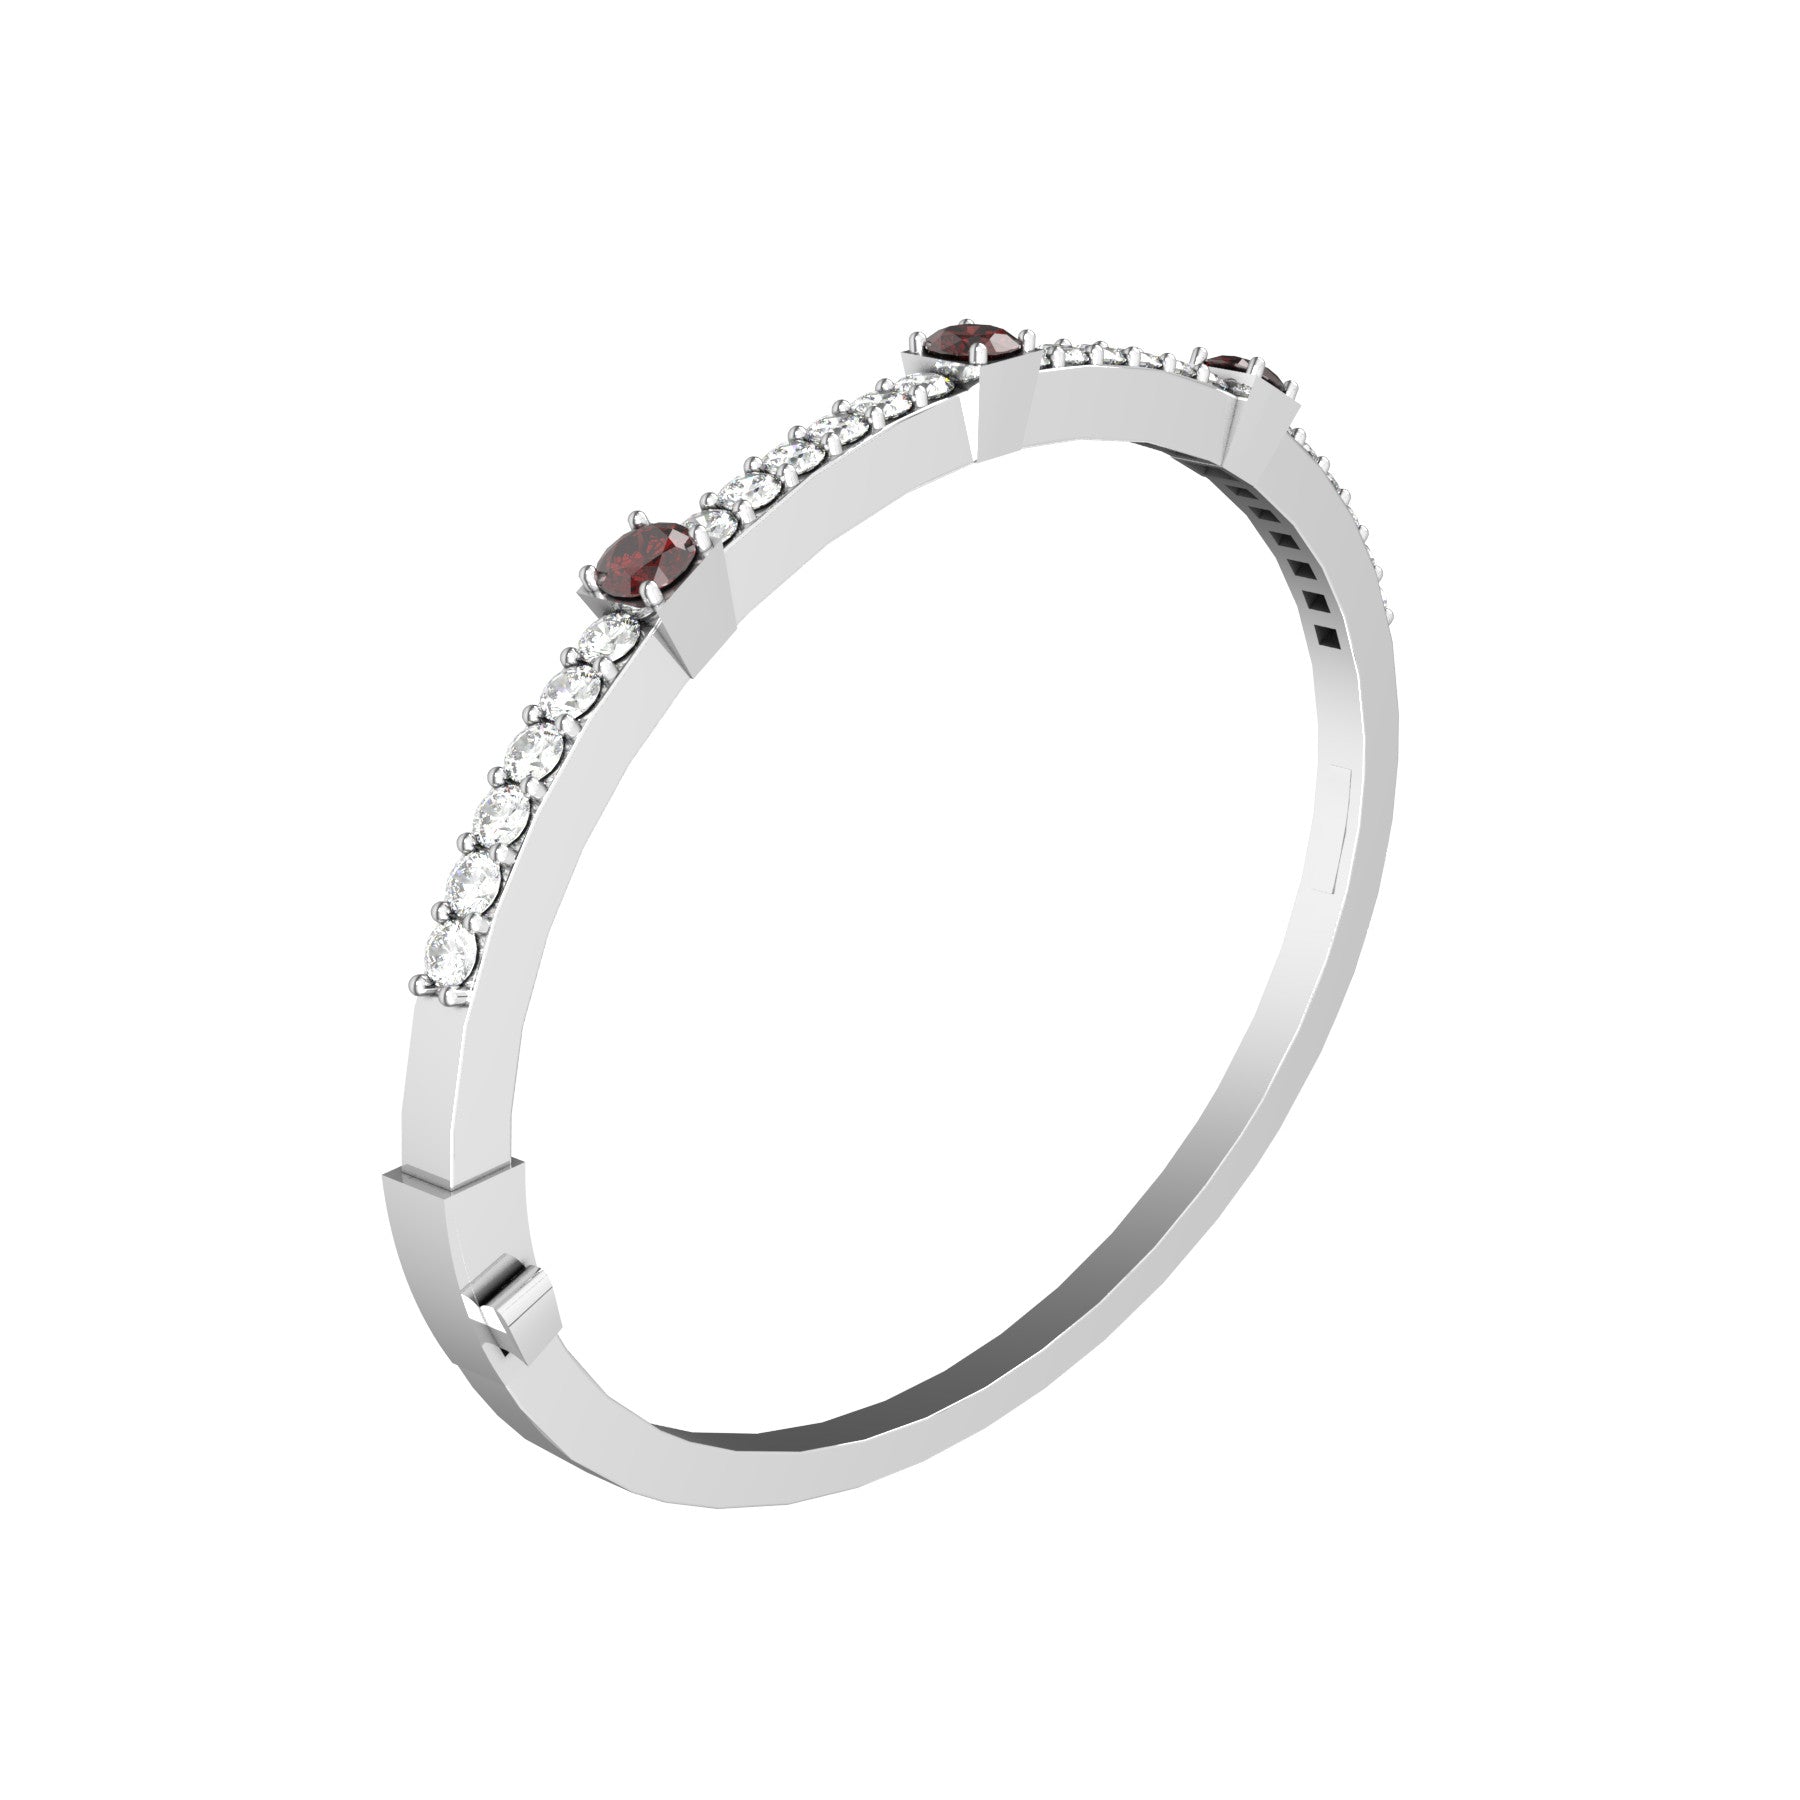 vesper rigid bracelet, natural round rubies, natural round diamonds, 18 K white gold, weight  about 16,0 to 34,1 g (0.56 to 1.20 oz); width 4,0 mm max